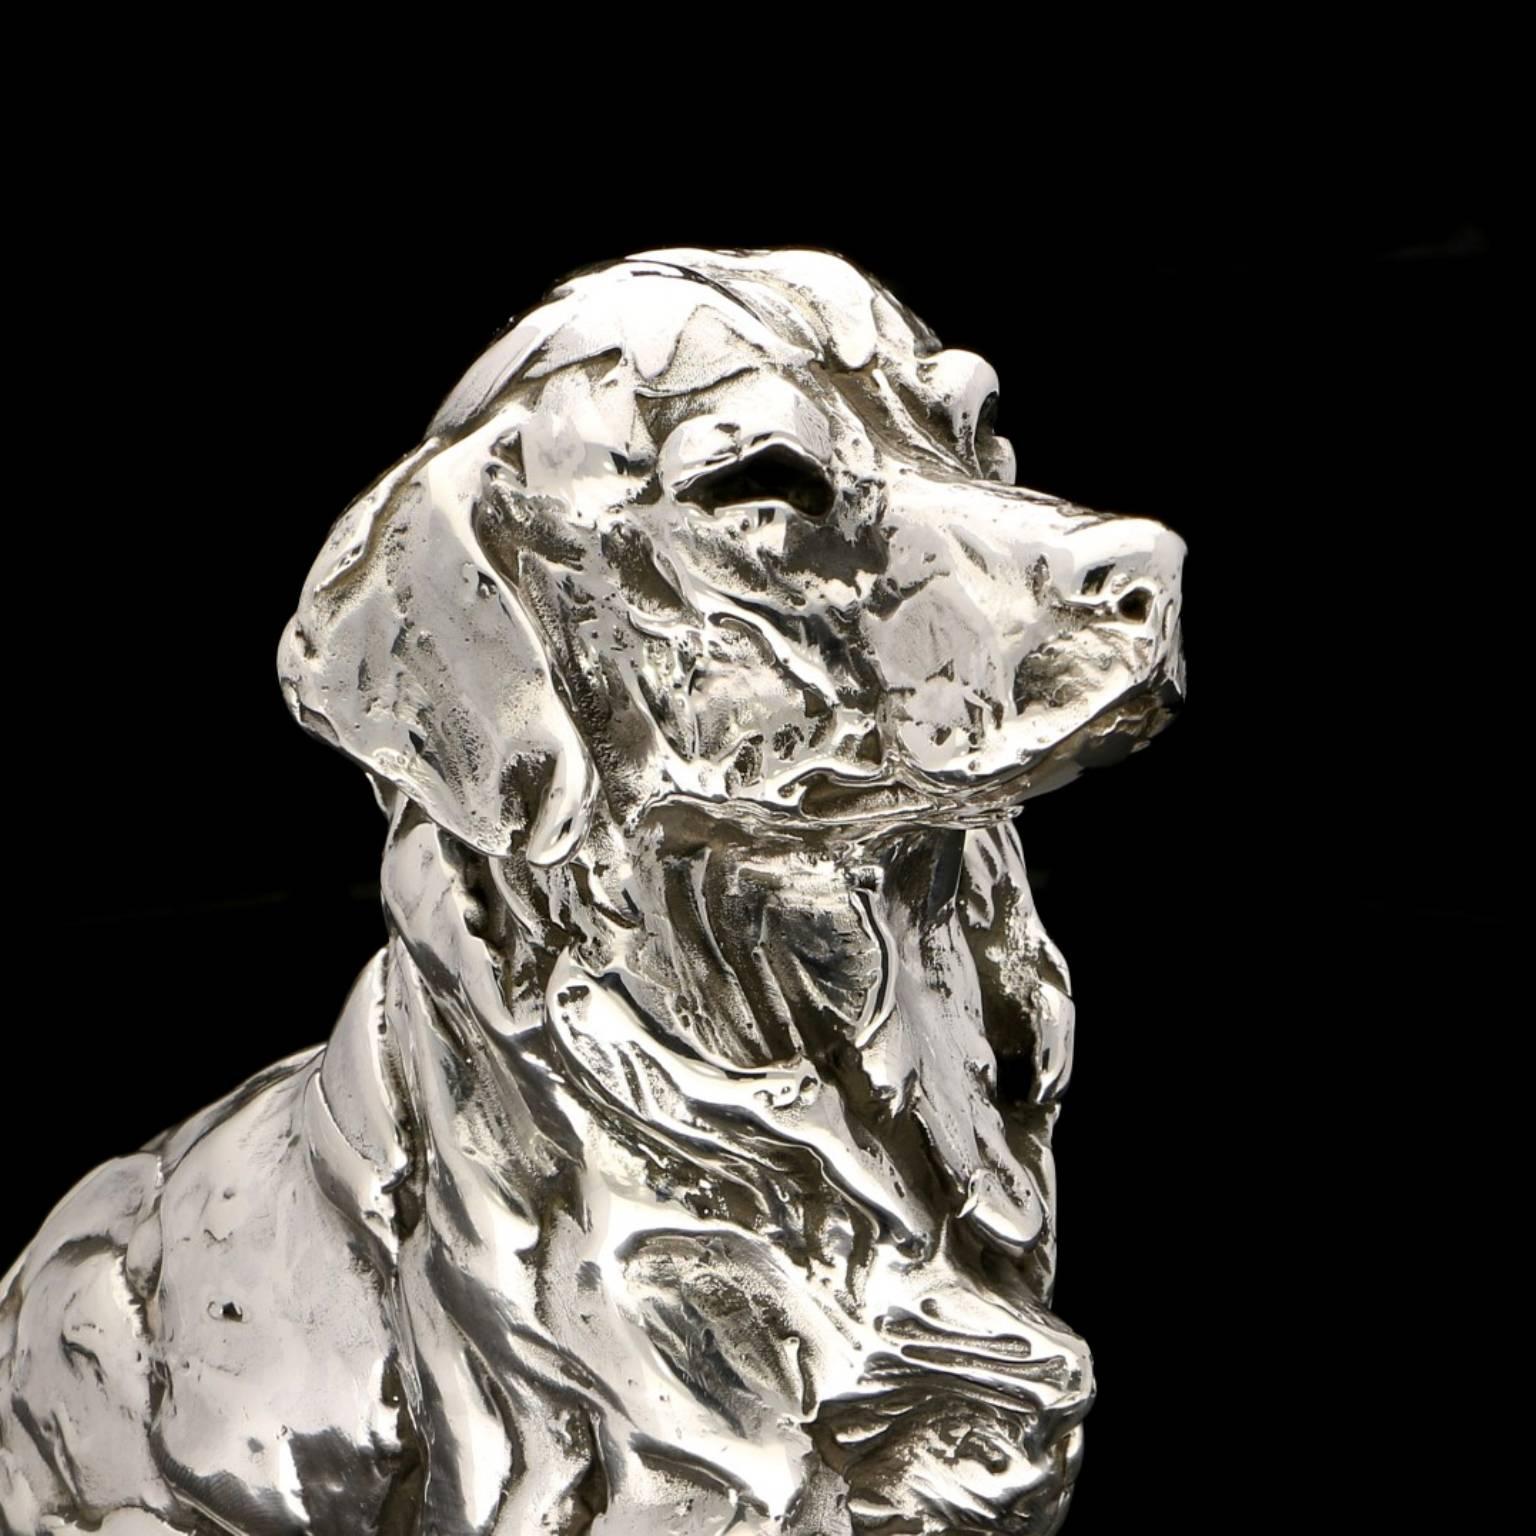 Seated Golden Retriever sterling silver sculpture - Sculpture by Lucy Kinsella